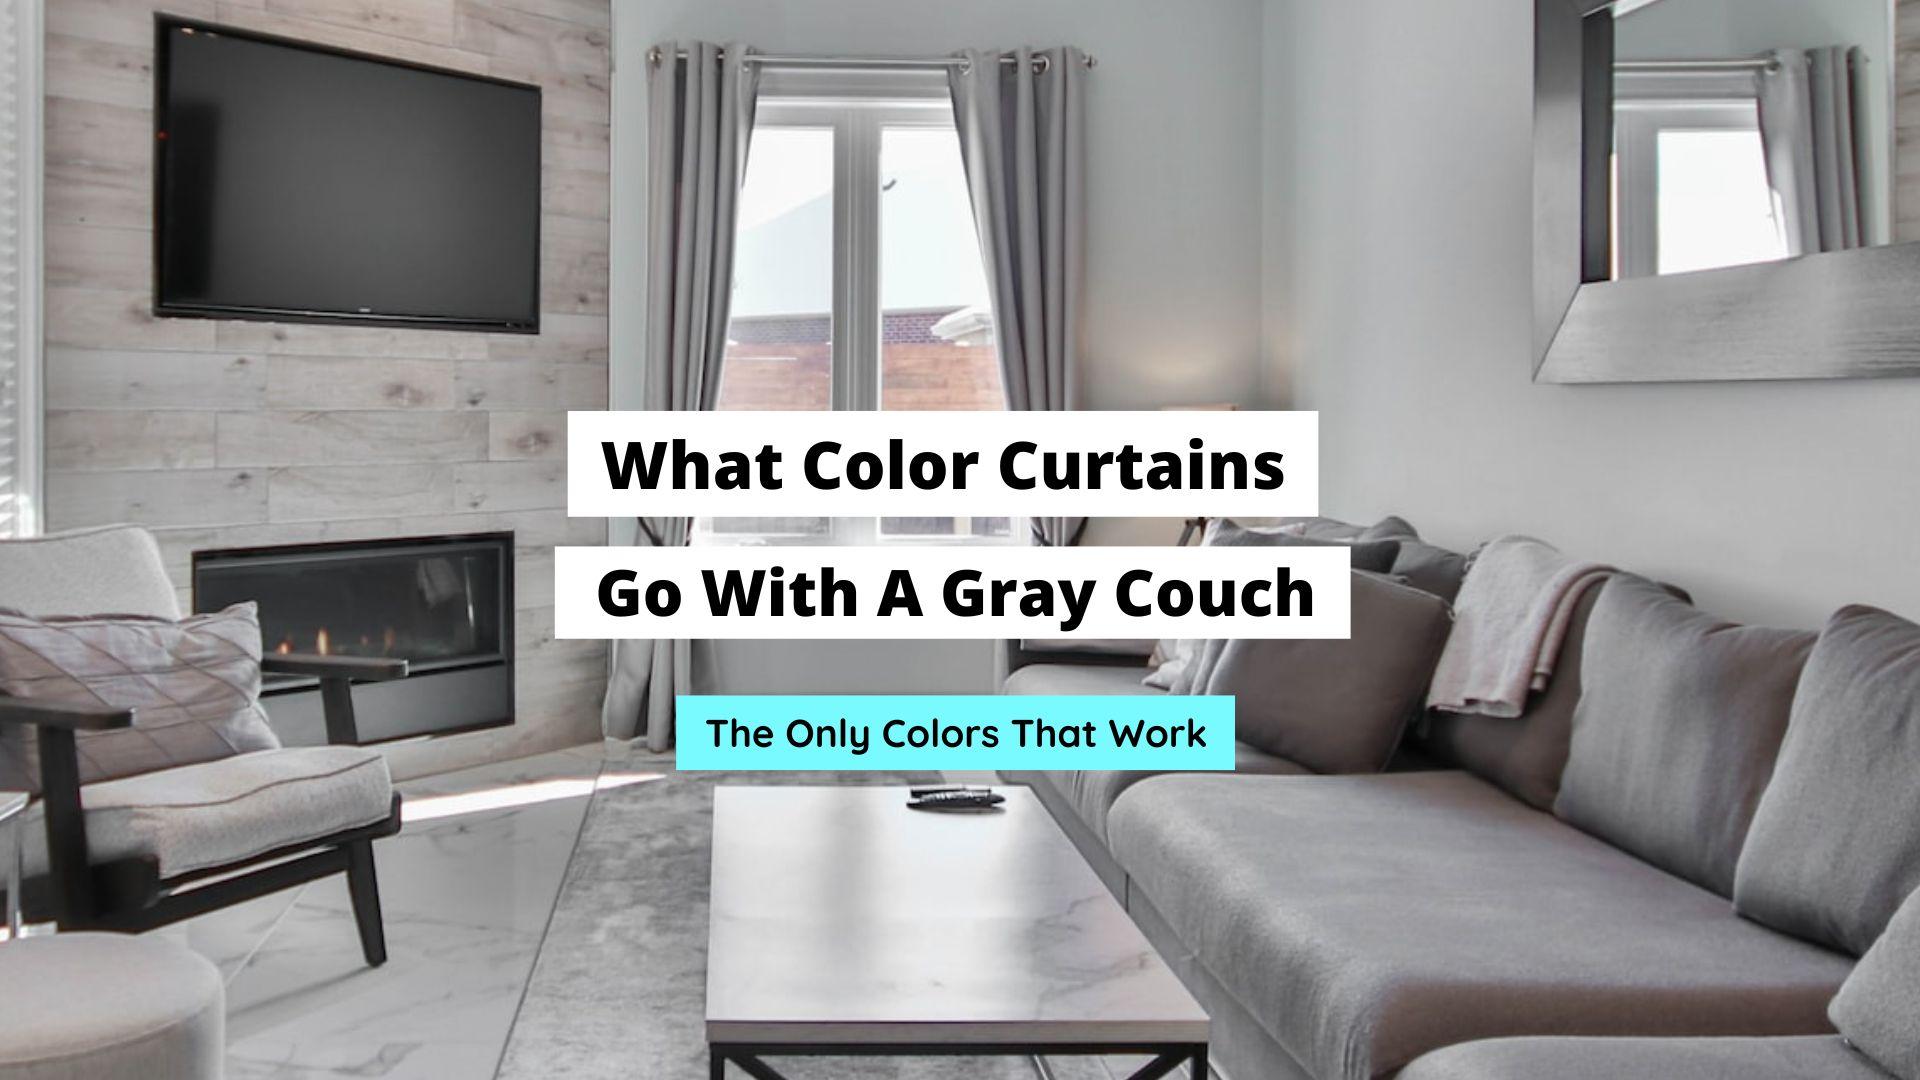 What Color Curtains Go With A Gray Couch